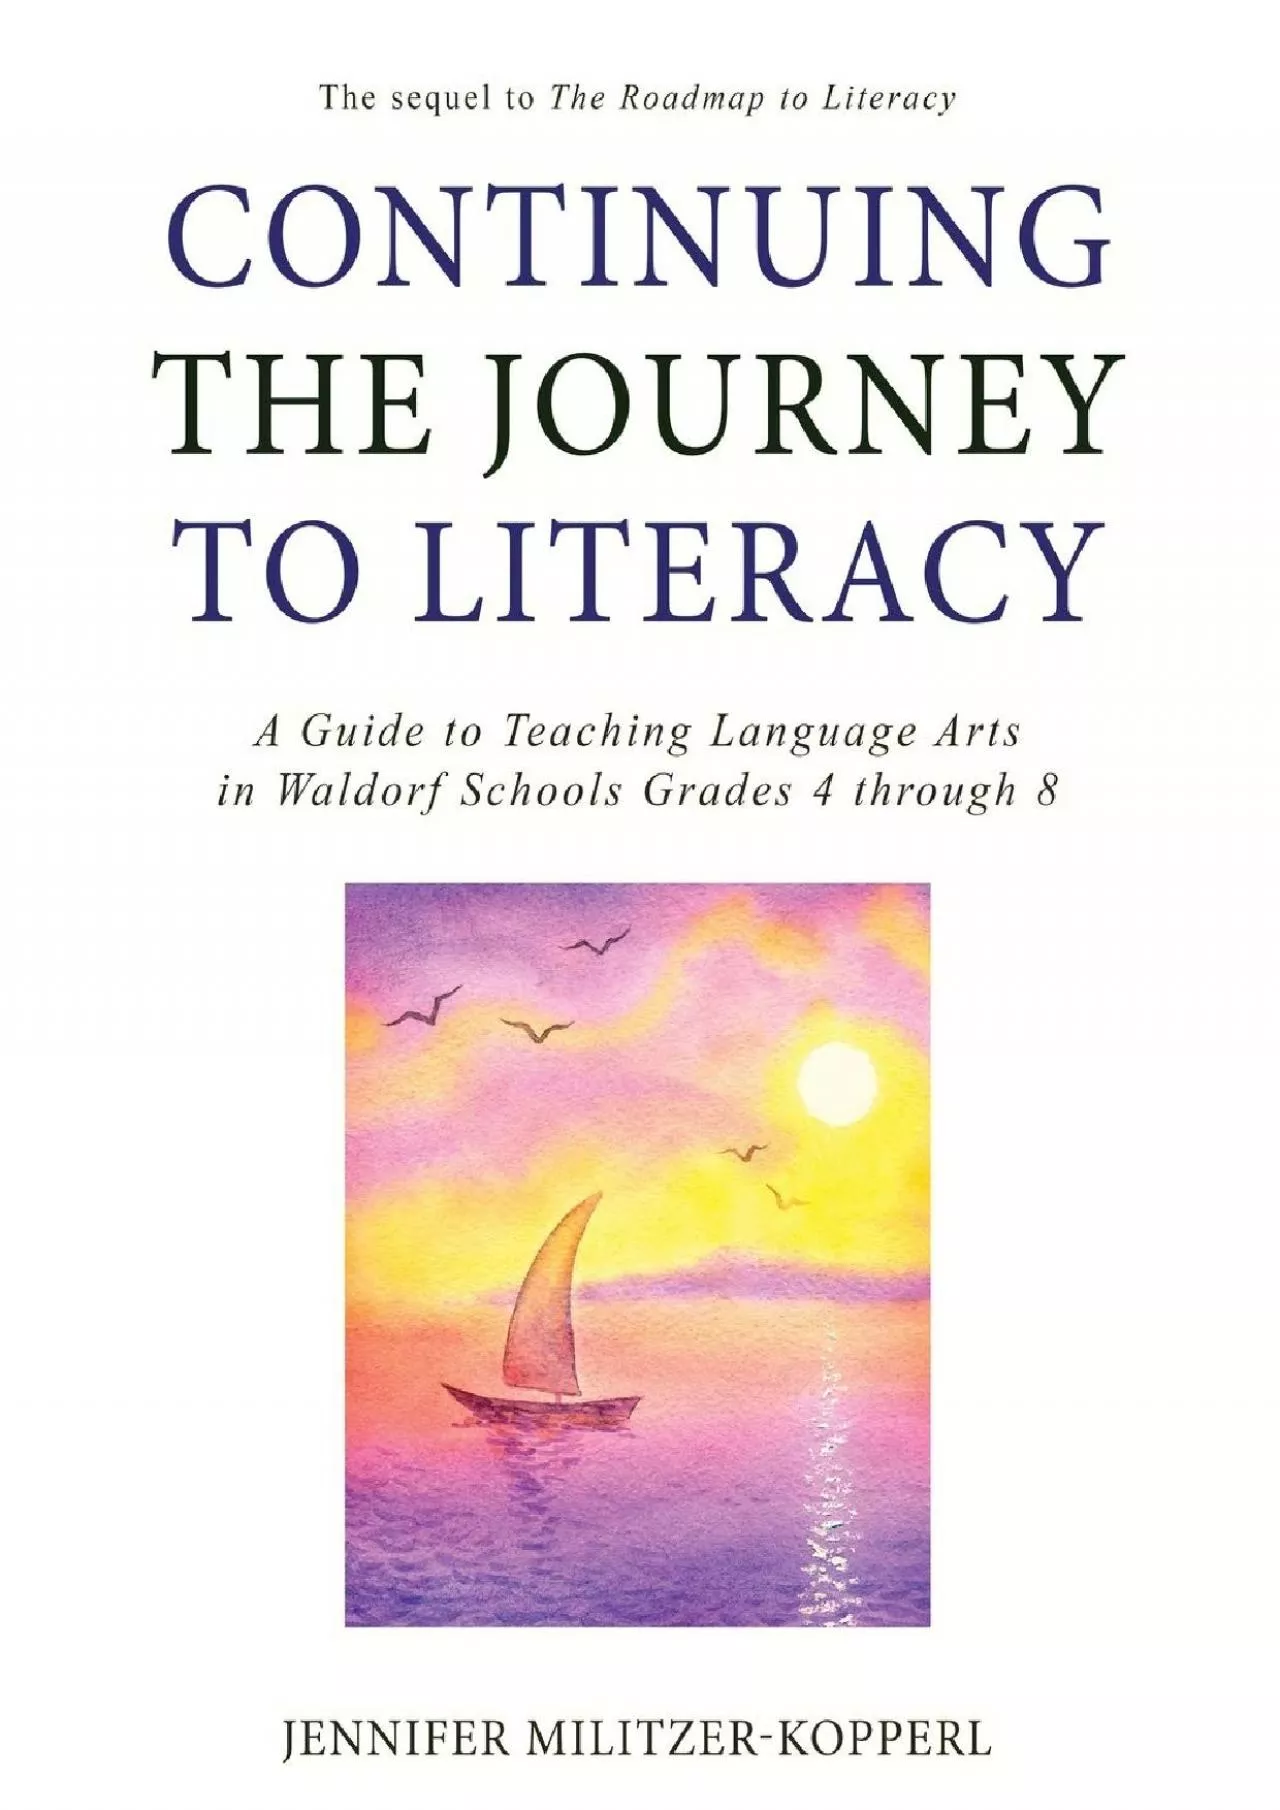 [DOWNLOAD] Continuing the Journey to Literacy: A Guide to Teaching Language Arts in Waldorf